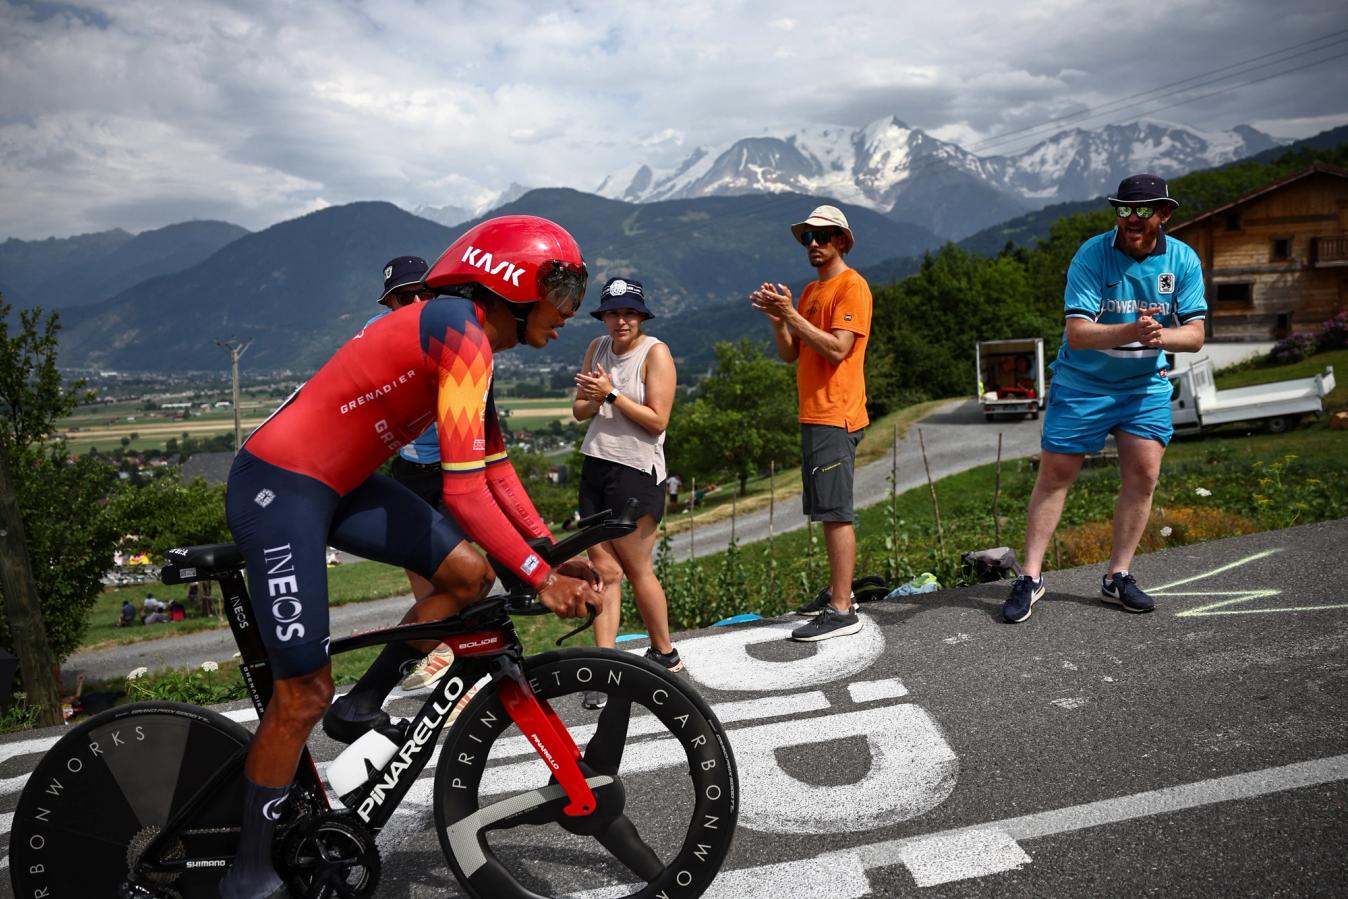 Egan Bernal managed to finish last year's Tour de France but should be a much stronger competitor this time around